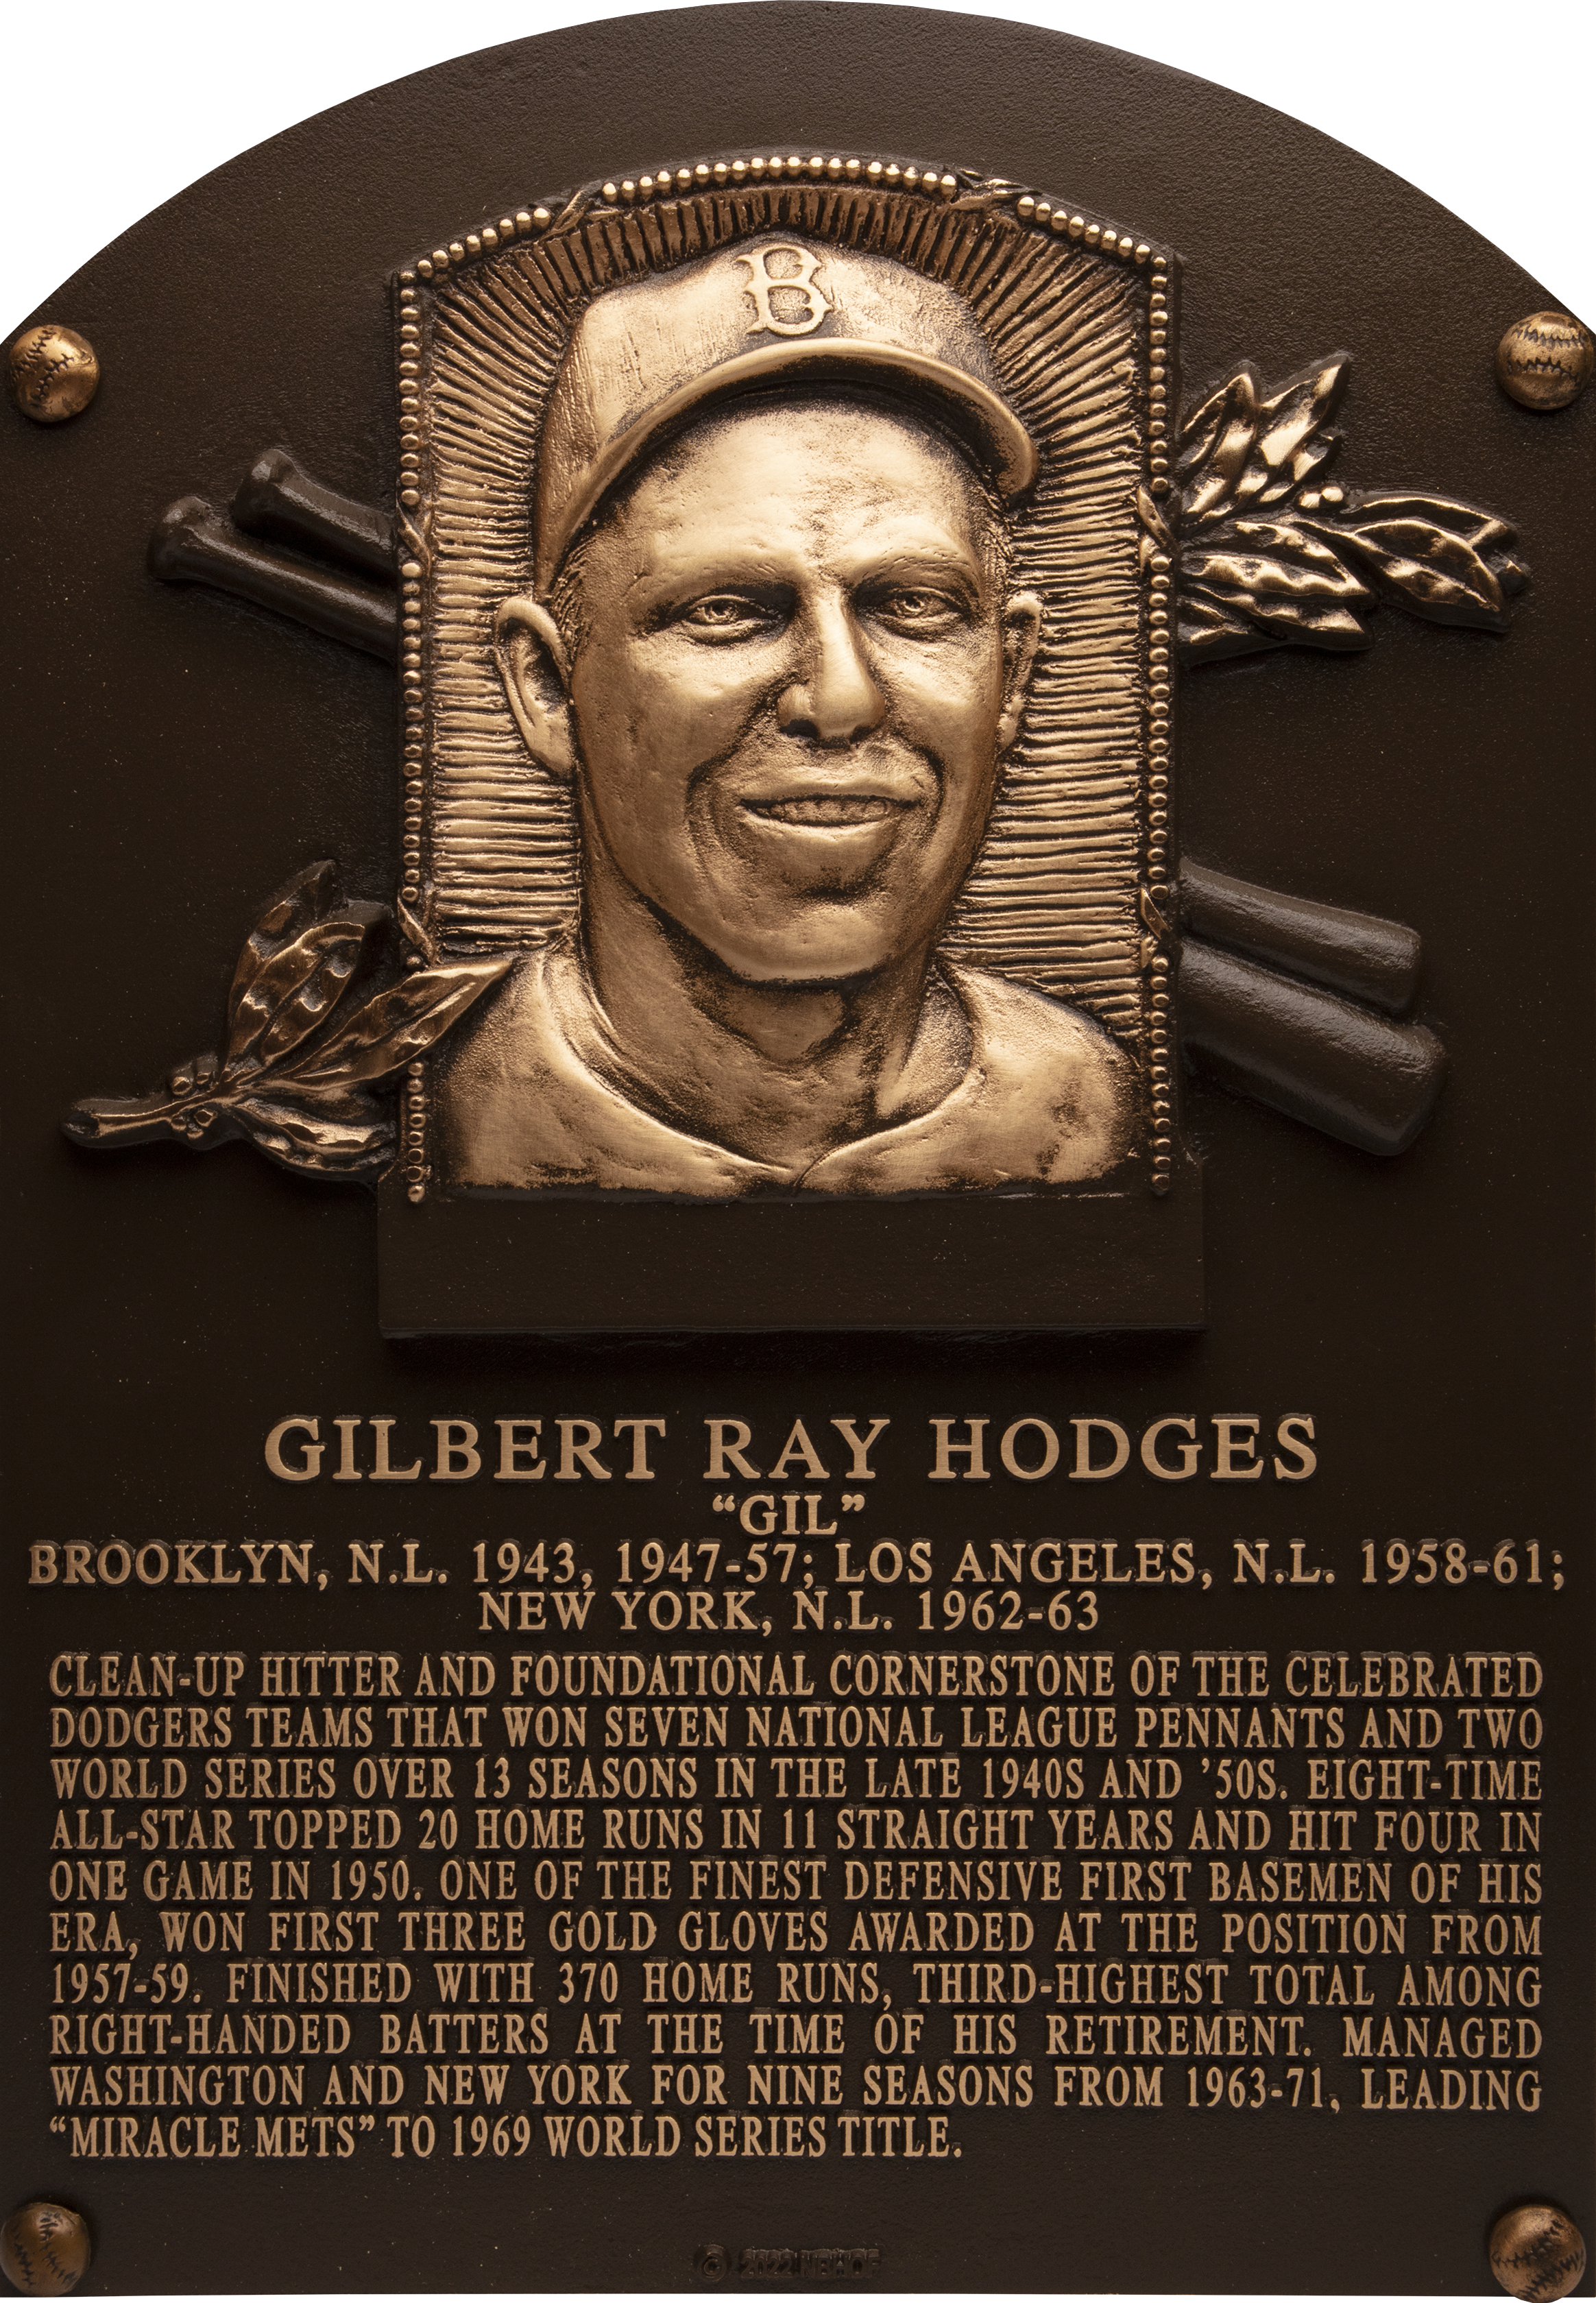 Gil Hodges Hall of Fame plaque